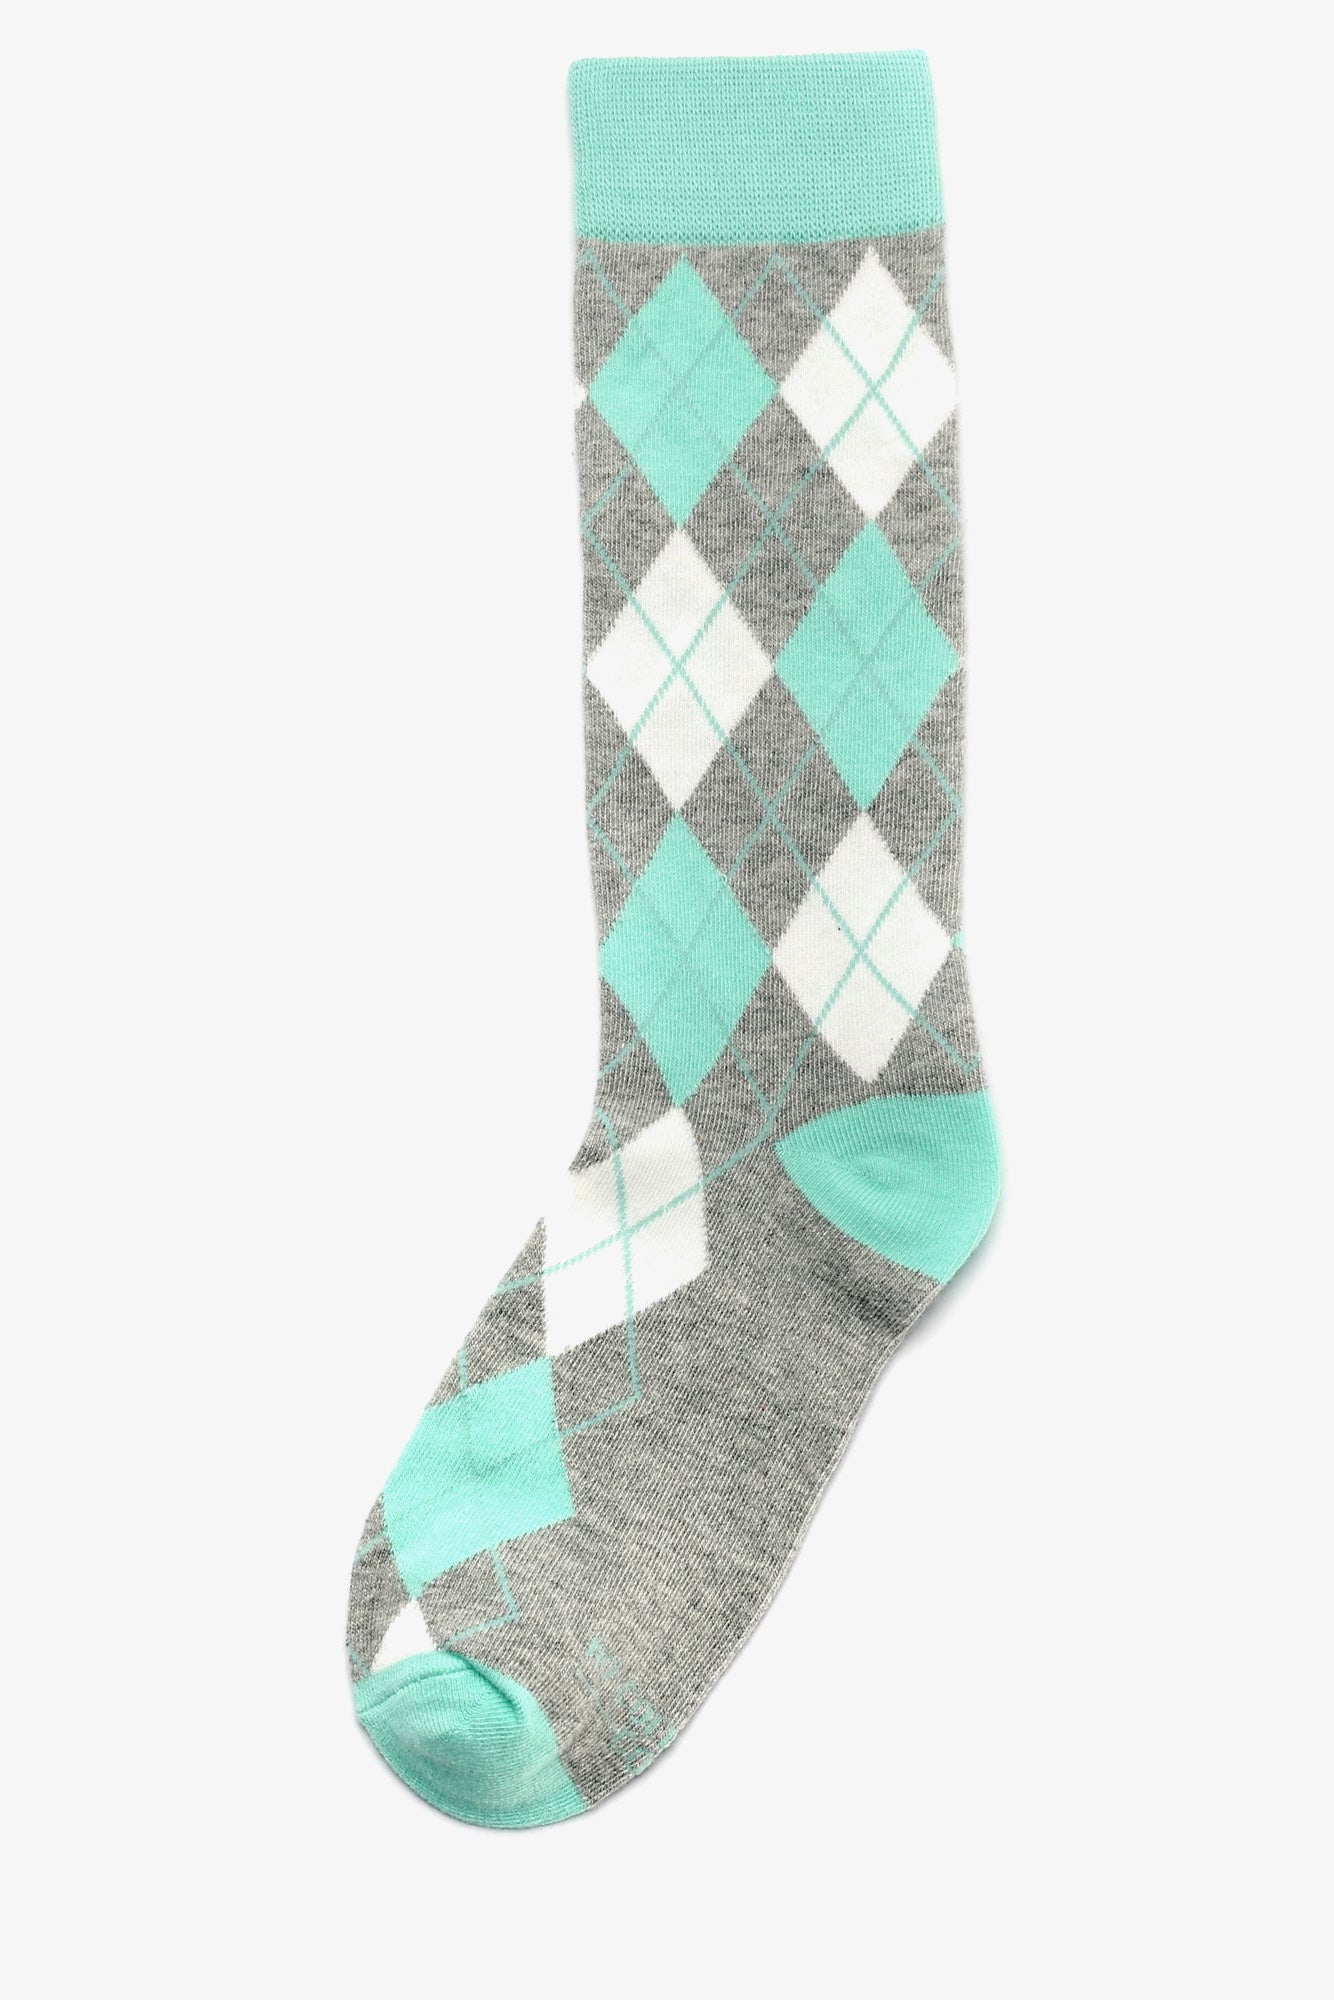 Mint Green and Grey Argyle Groomsmen Socks by No Cold Feet